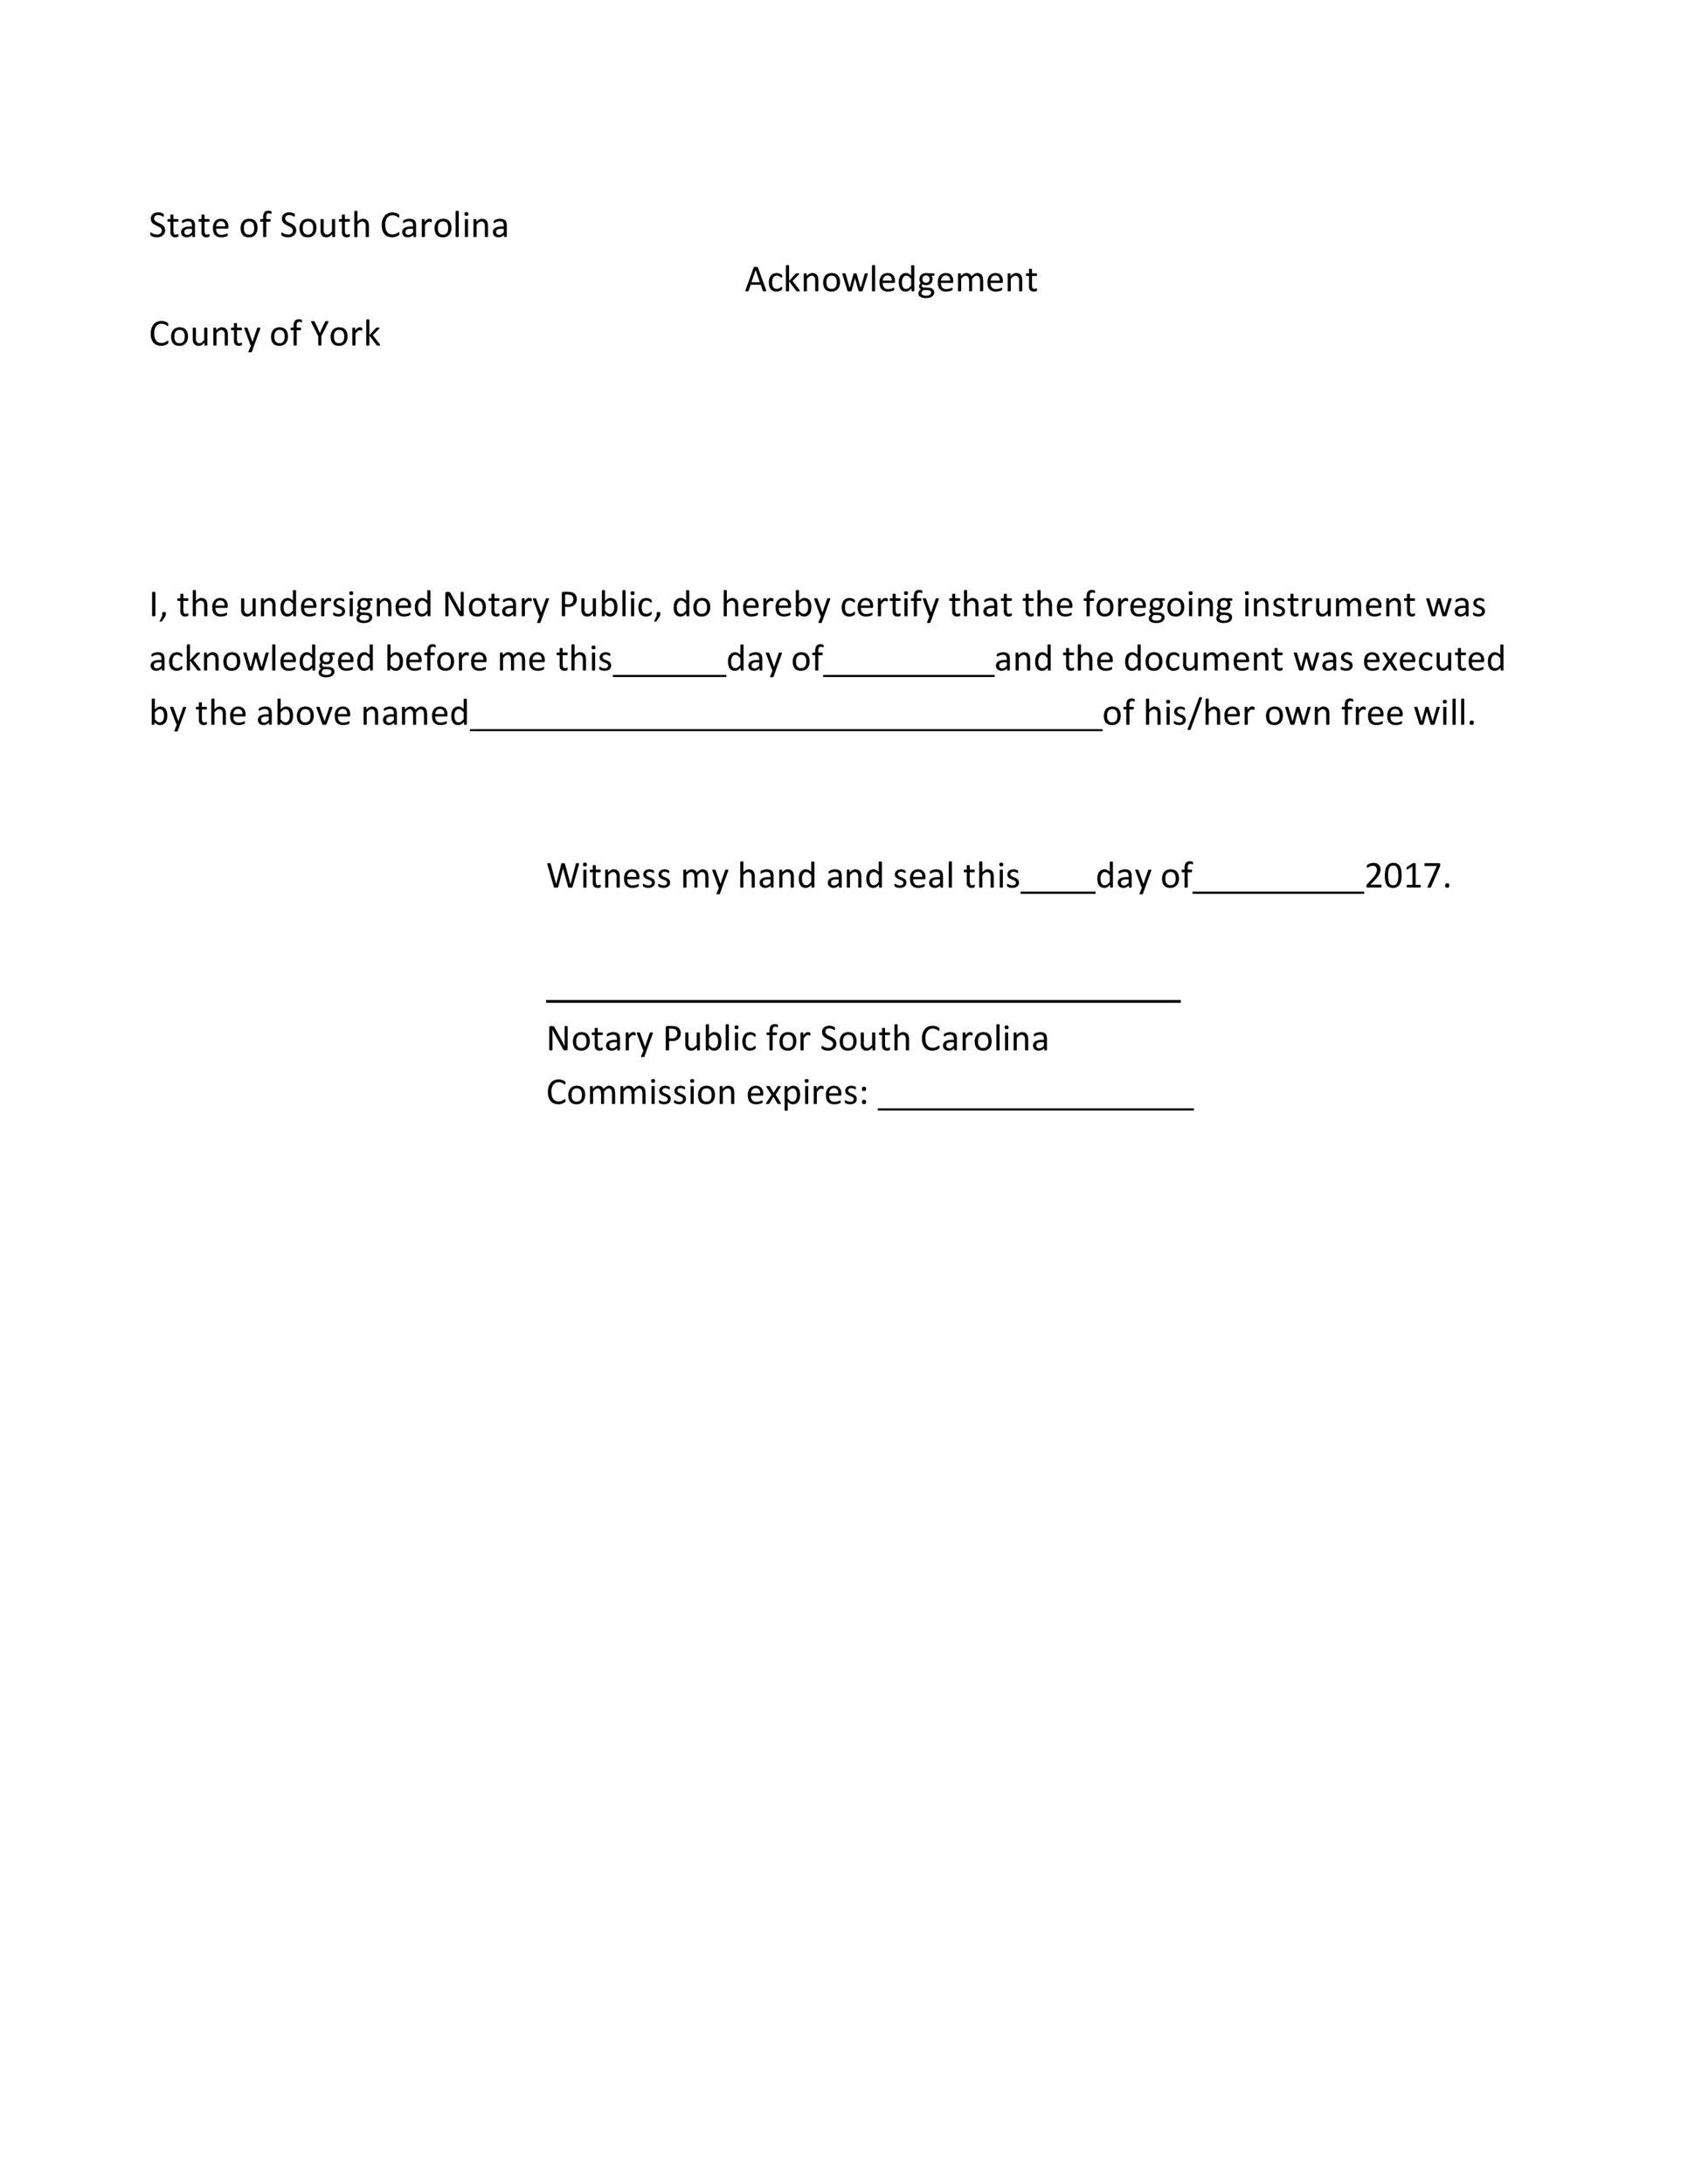 40 Free Notary Acknowledgement Statement Templates TemplateLab